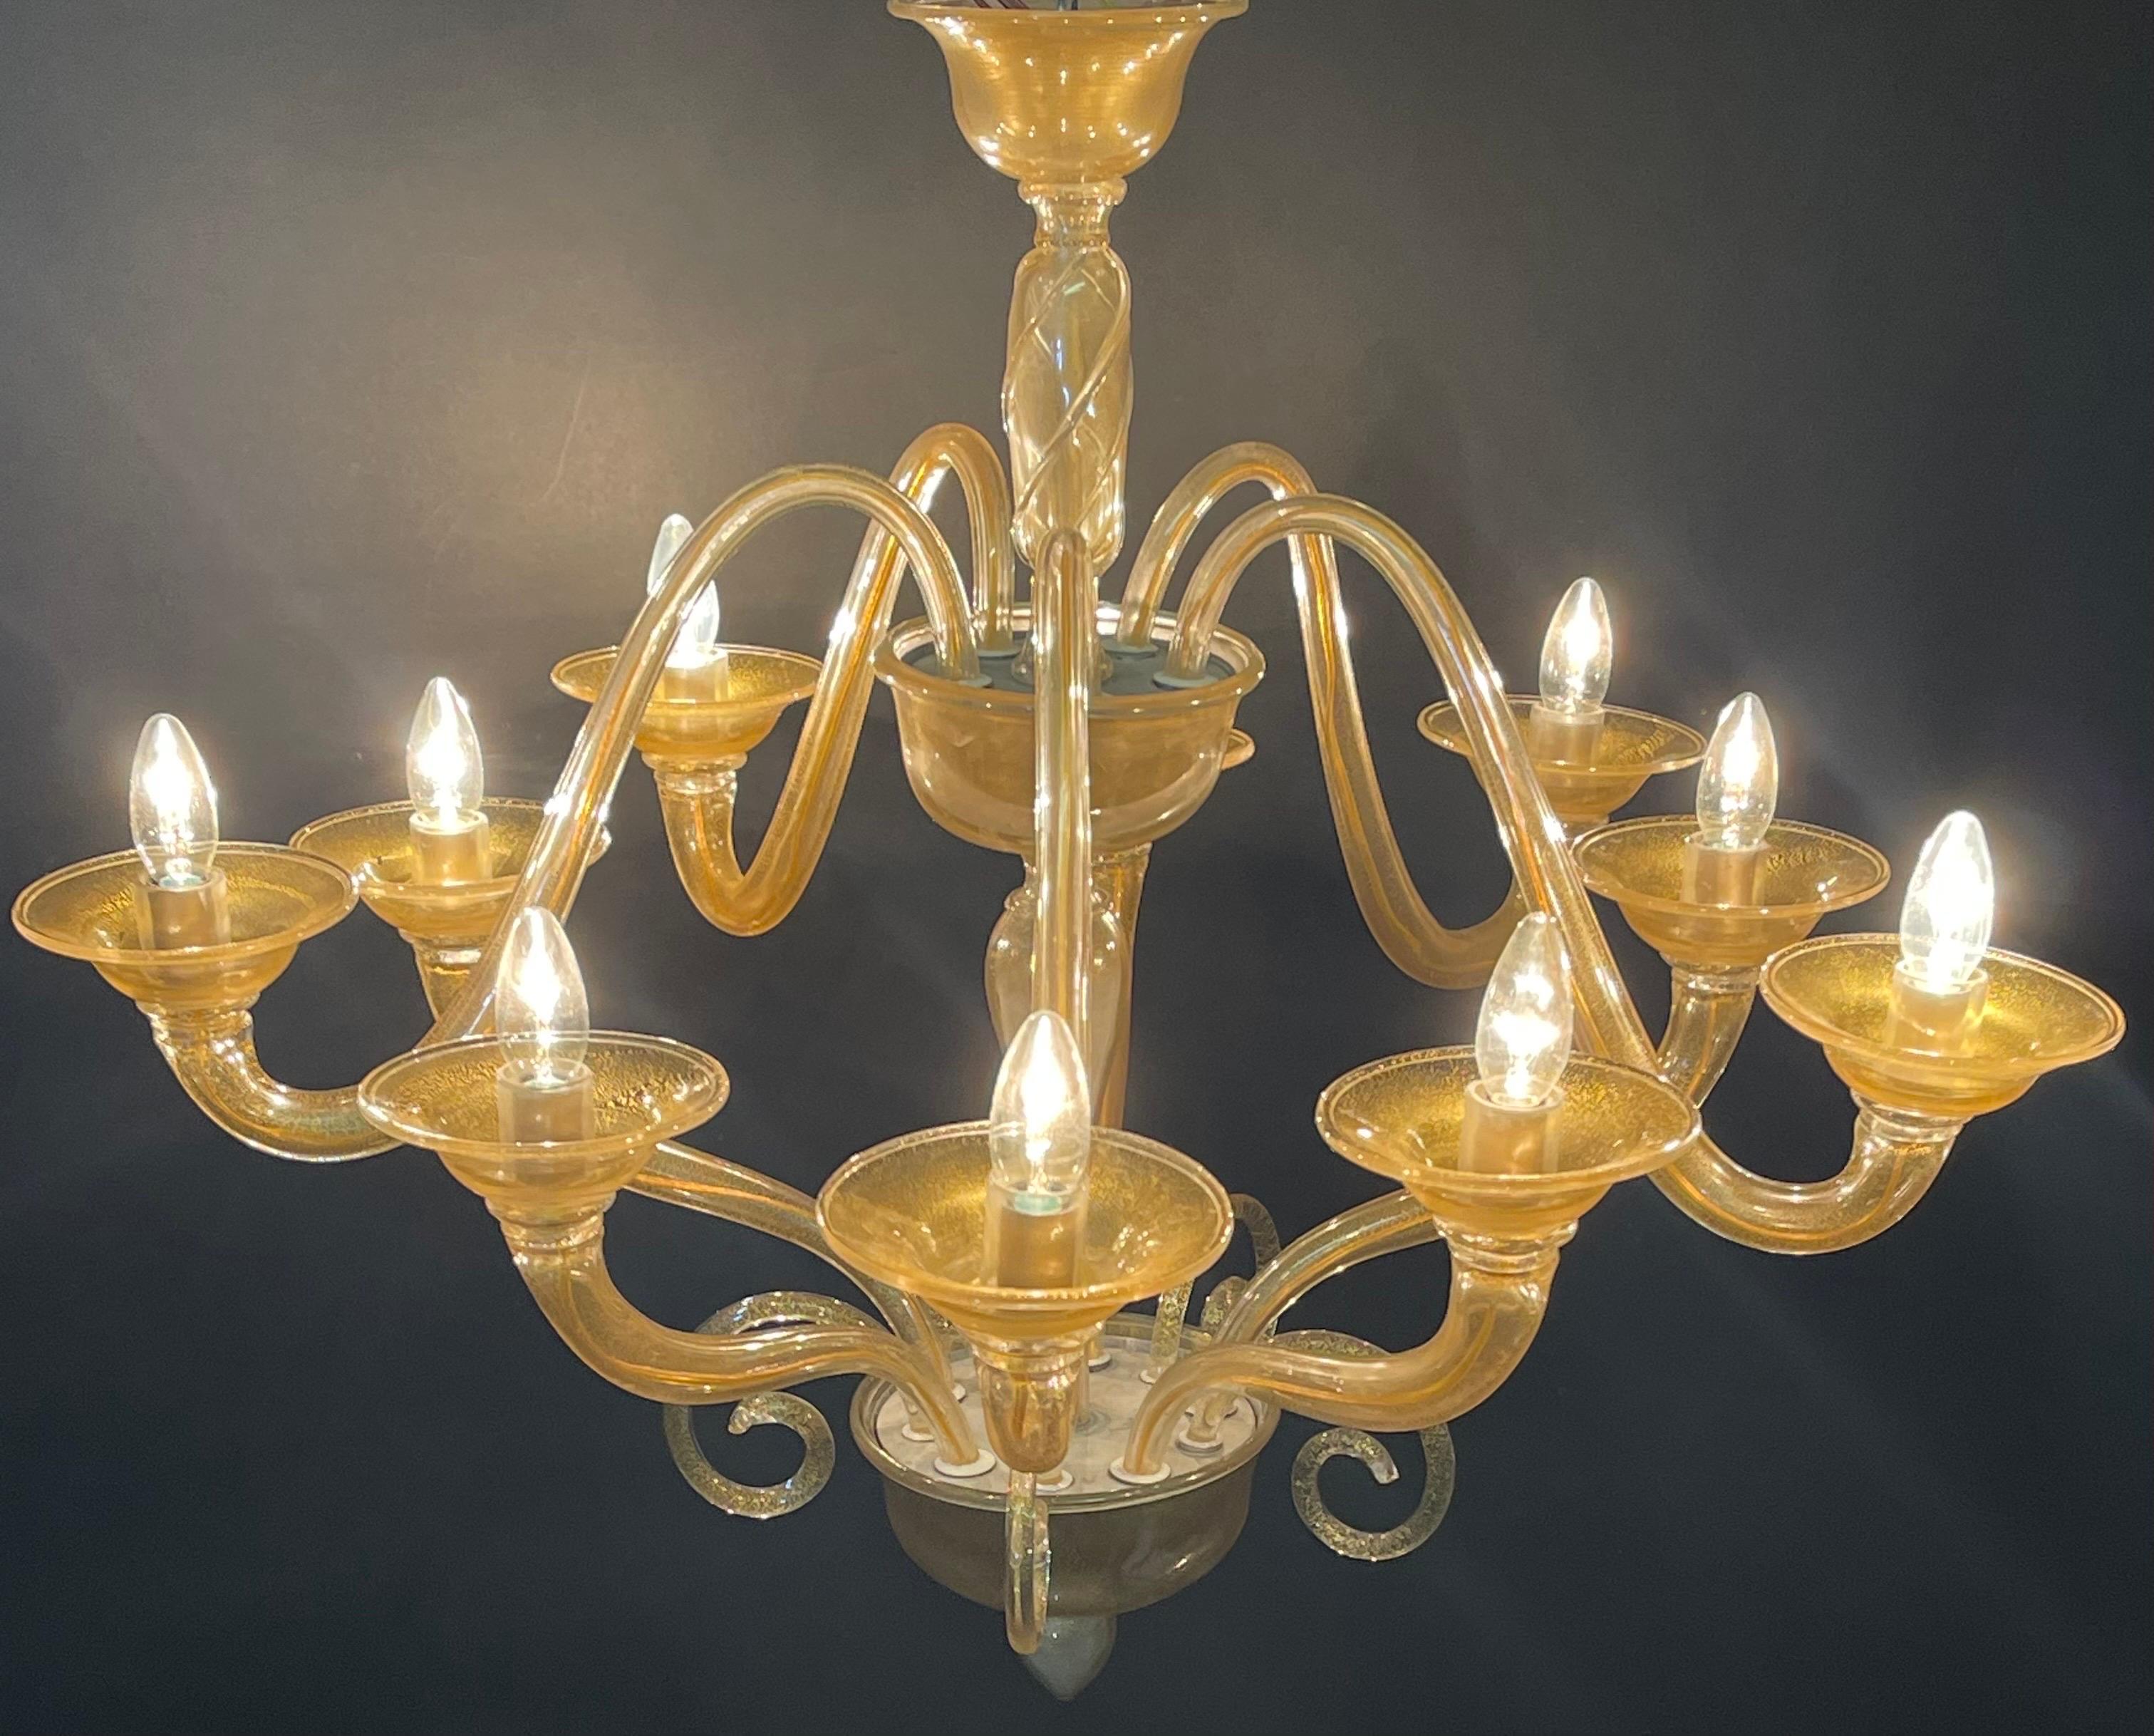 Gold Dusted Handblown Murano Glass Chandelier by Seguso, circa 1960s For Sale 2